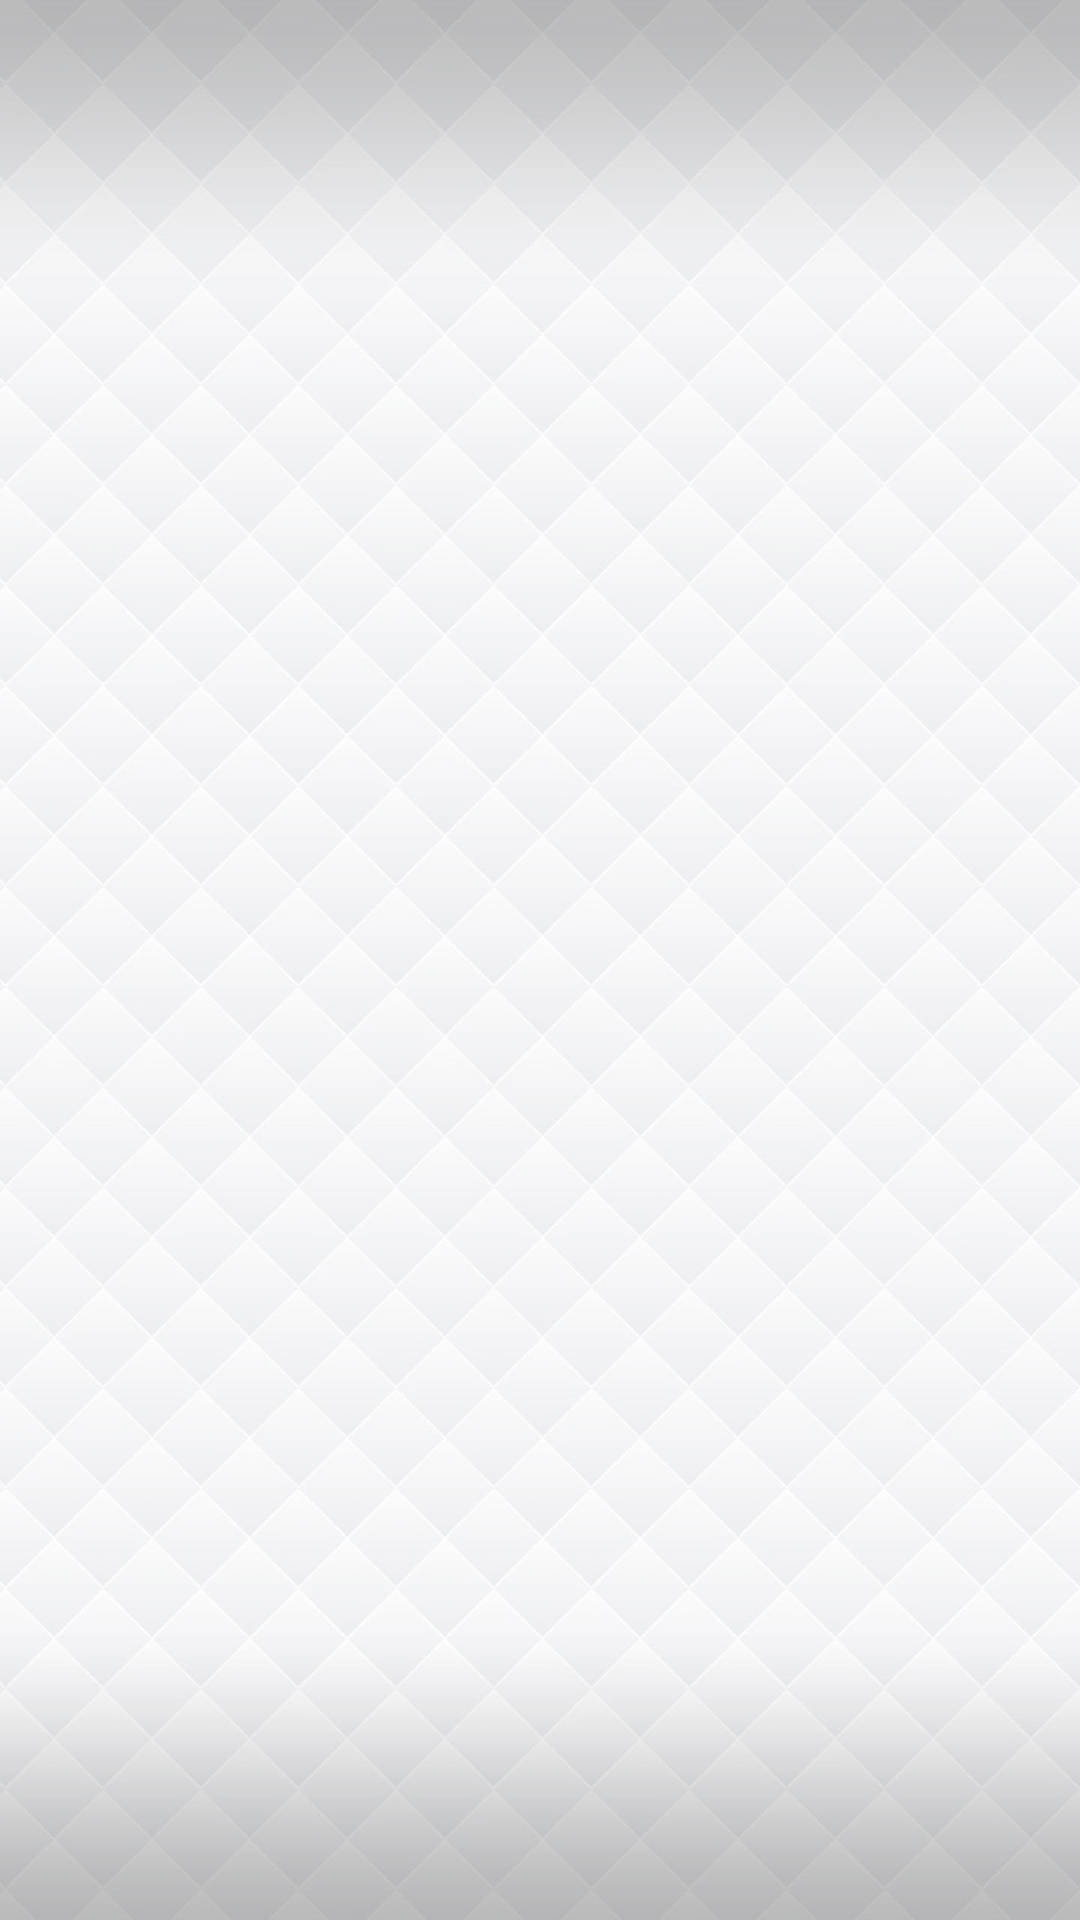 Small-tile Pattern For White Screen Phone